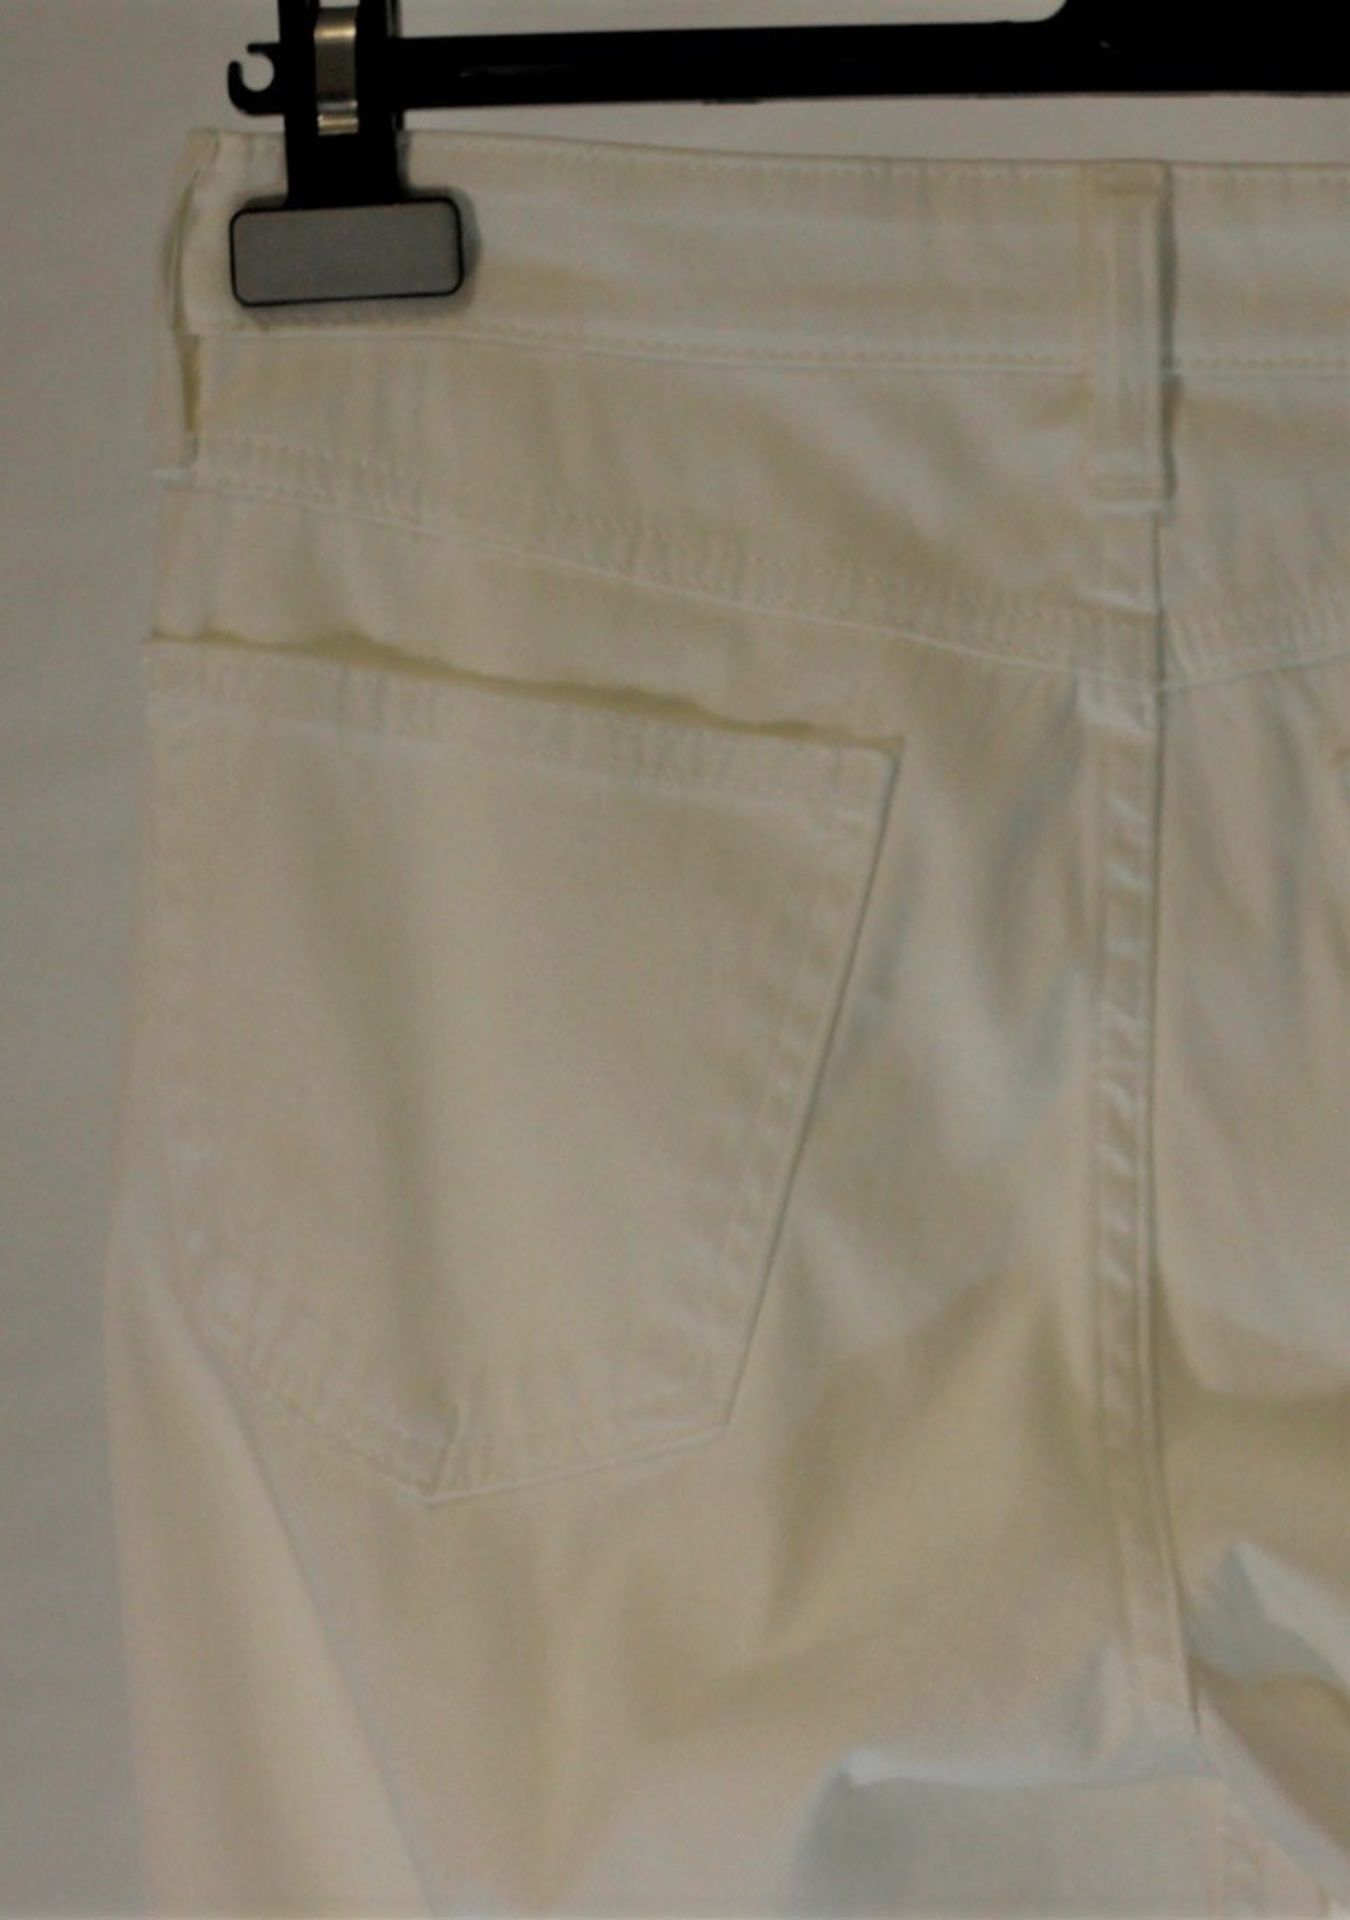 1 x Agnona Cream Jeans - Size: 14 - Material: 98% Cotton, 2% Elastane. Lining 100% Cotton - From a - Image 6 of 6